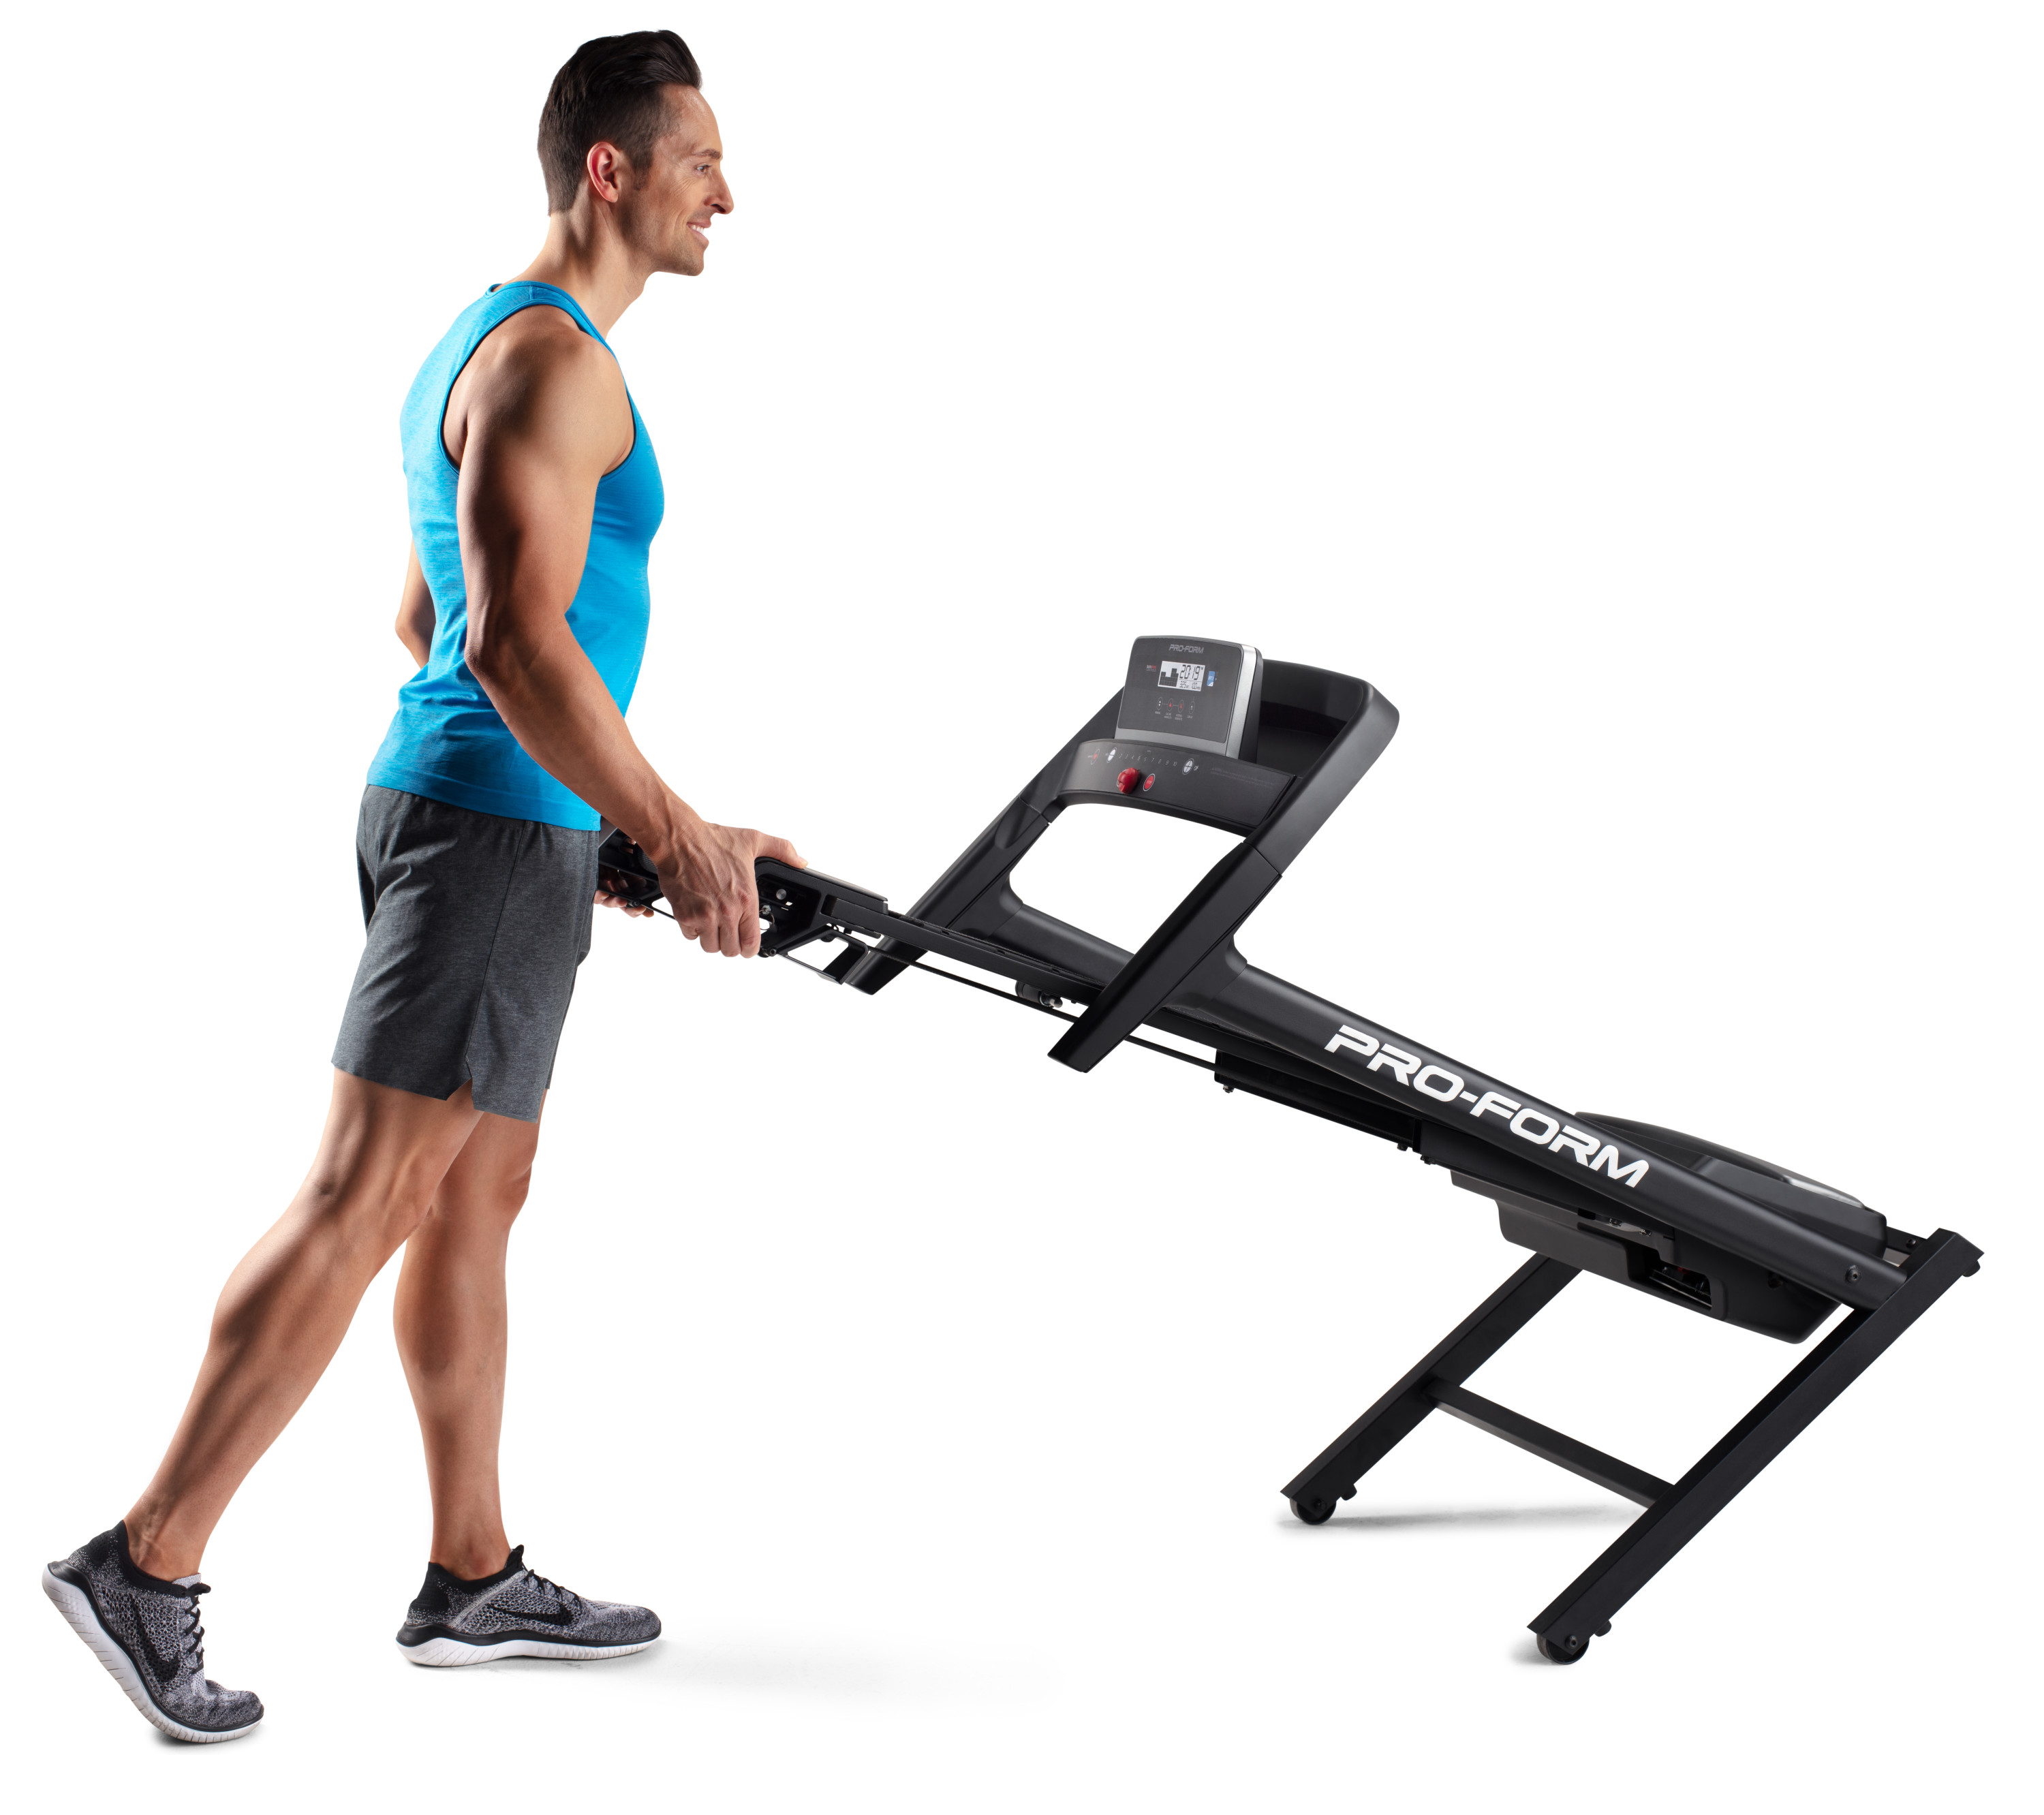 ProForm Cadence WLT Folding Treadmill with Reflex Deck for Walking and Jogging, iFit Bluetooth Enabled - image 18 of 31